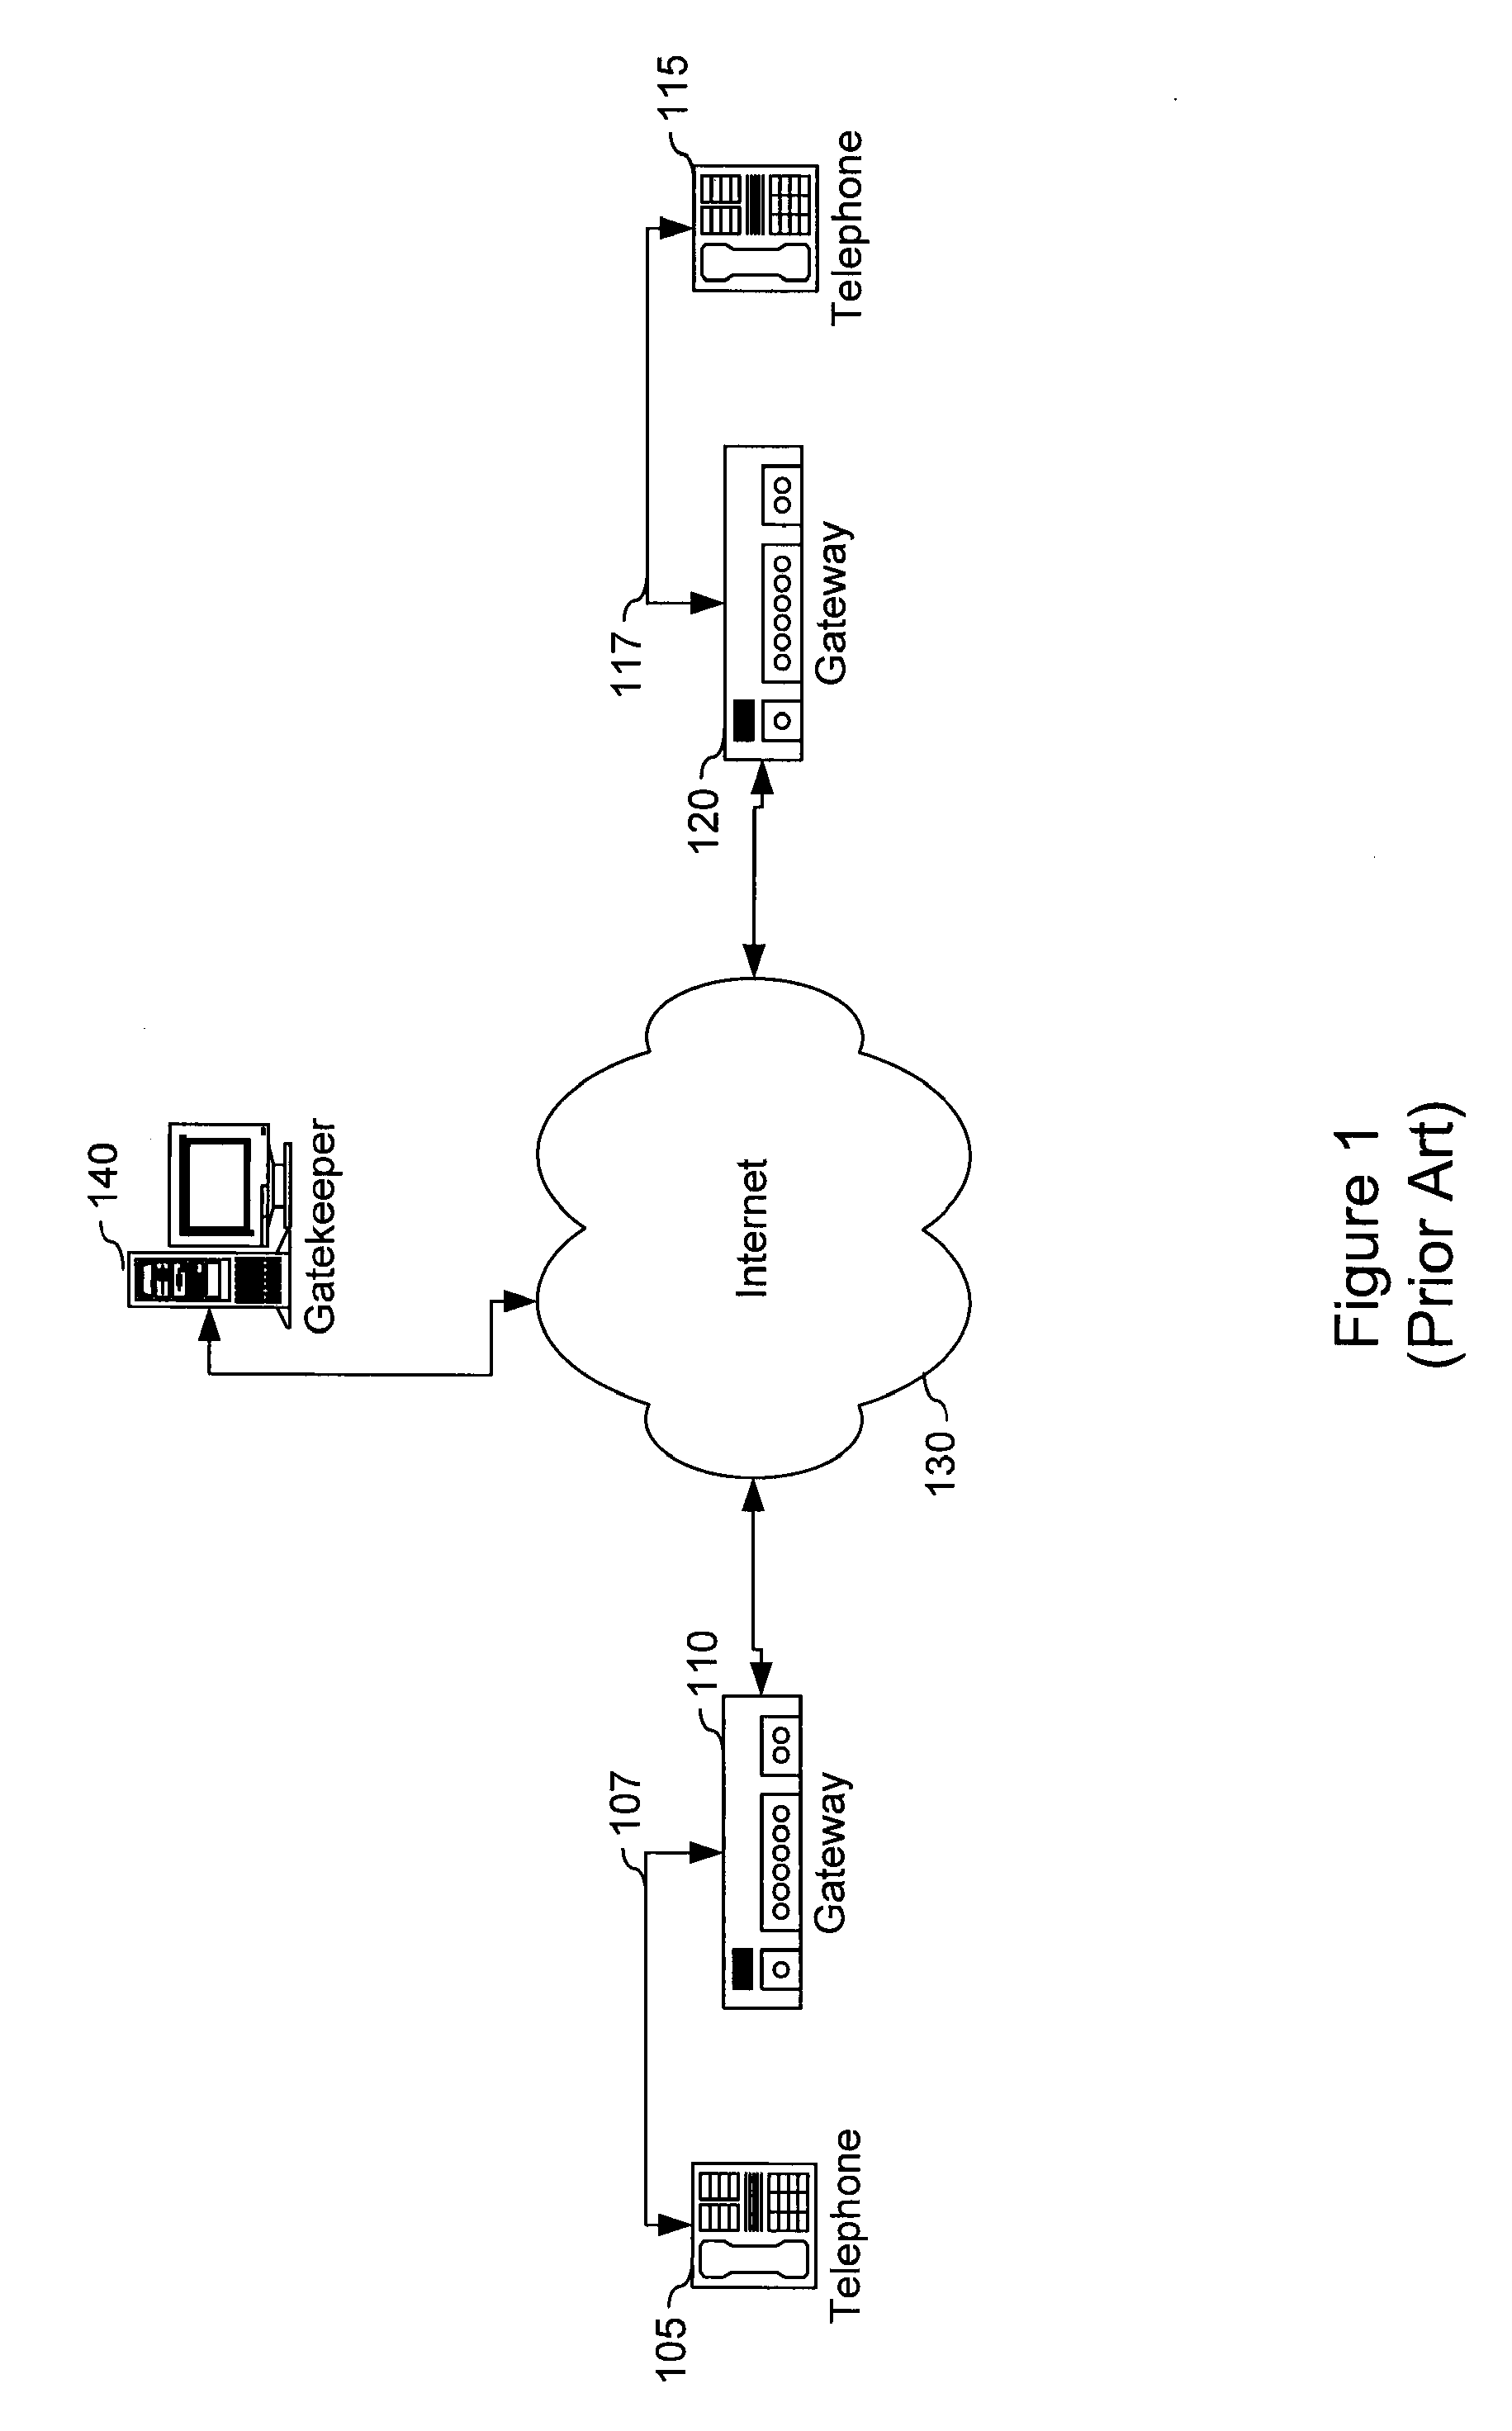 Port reduction for voice over internet protocol router